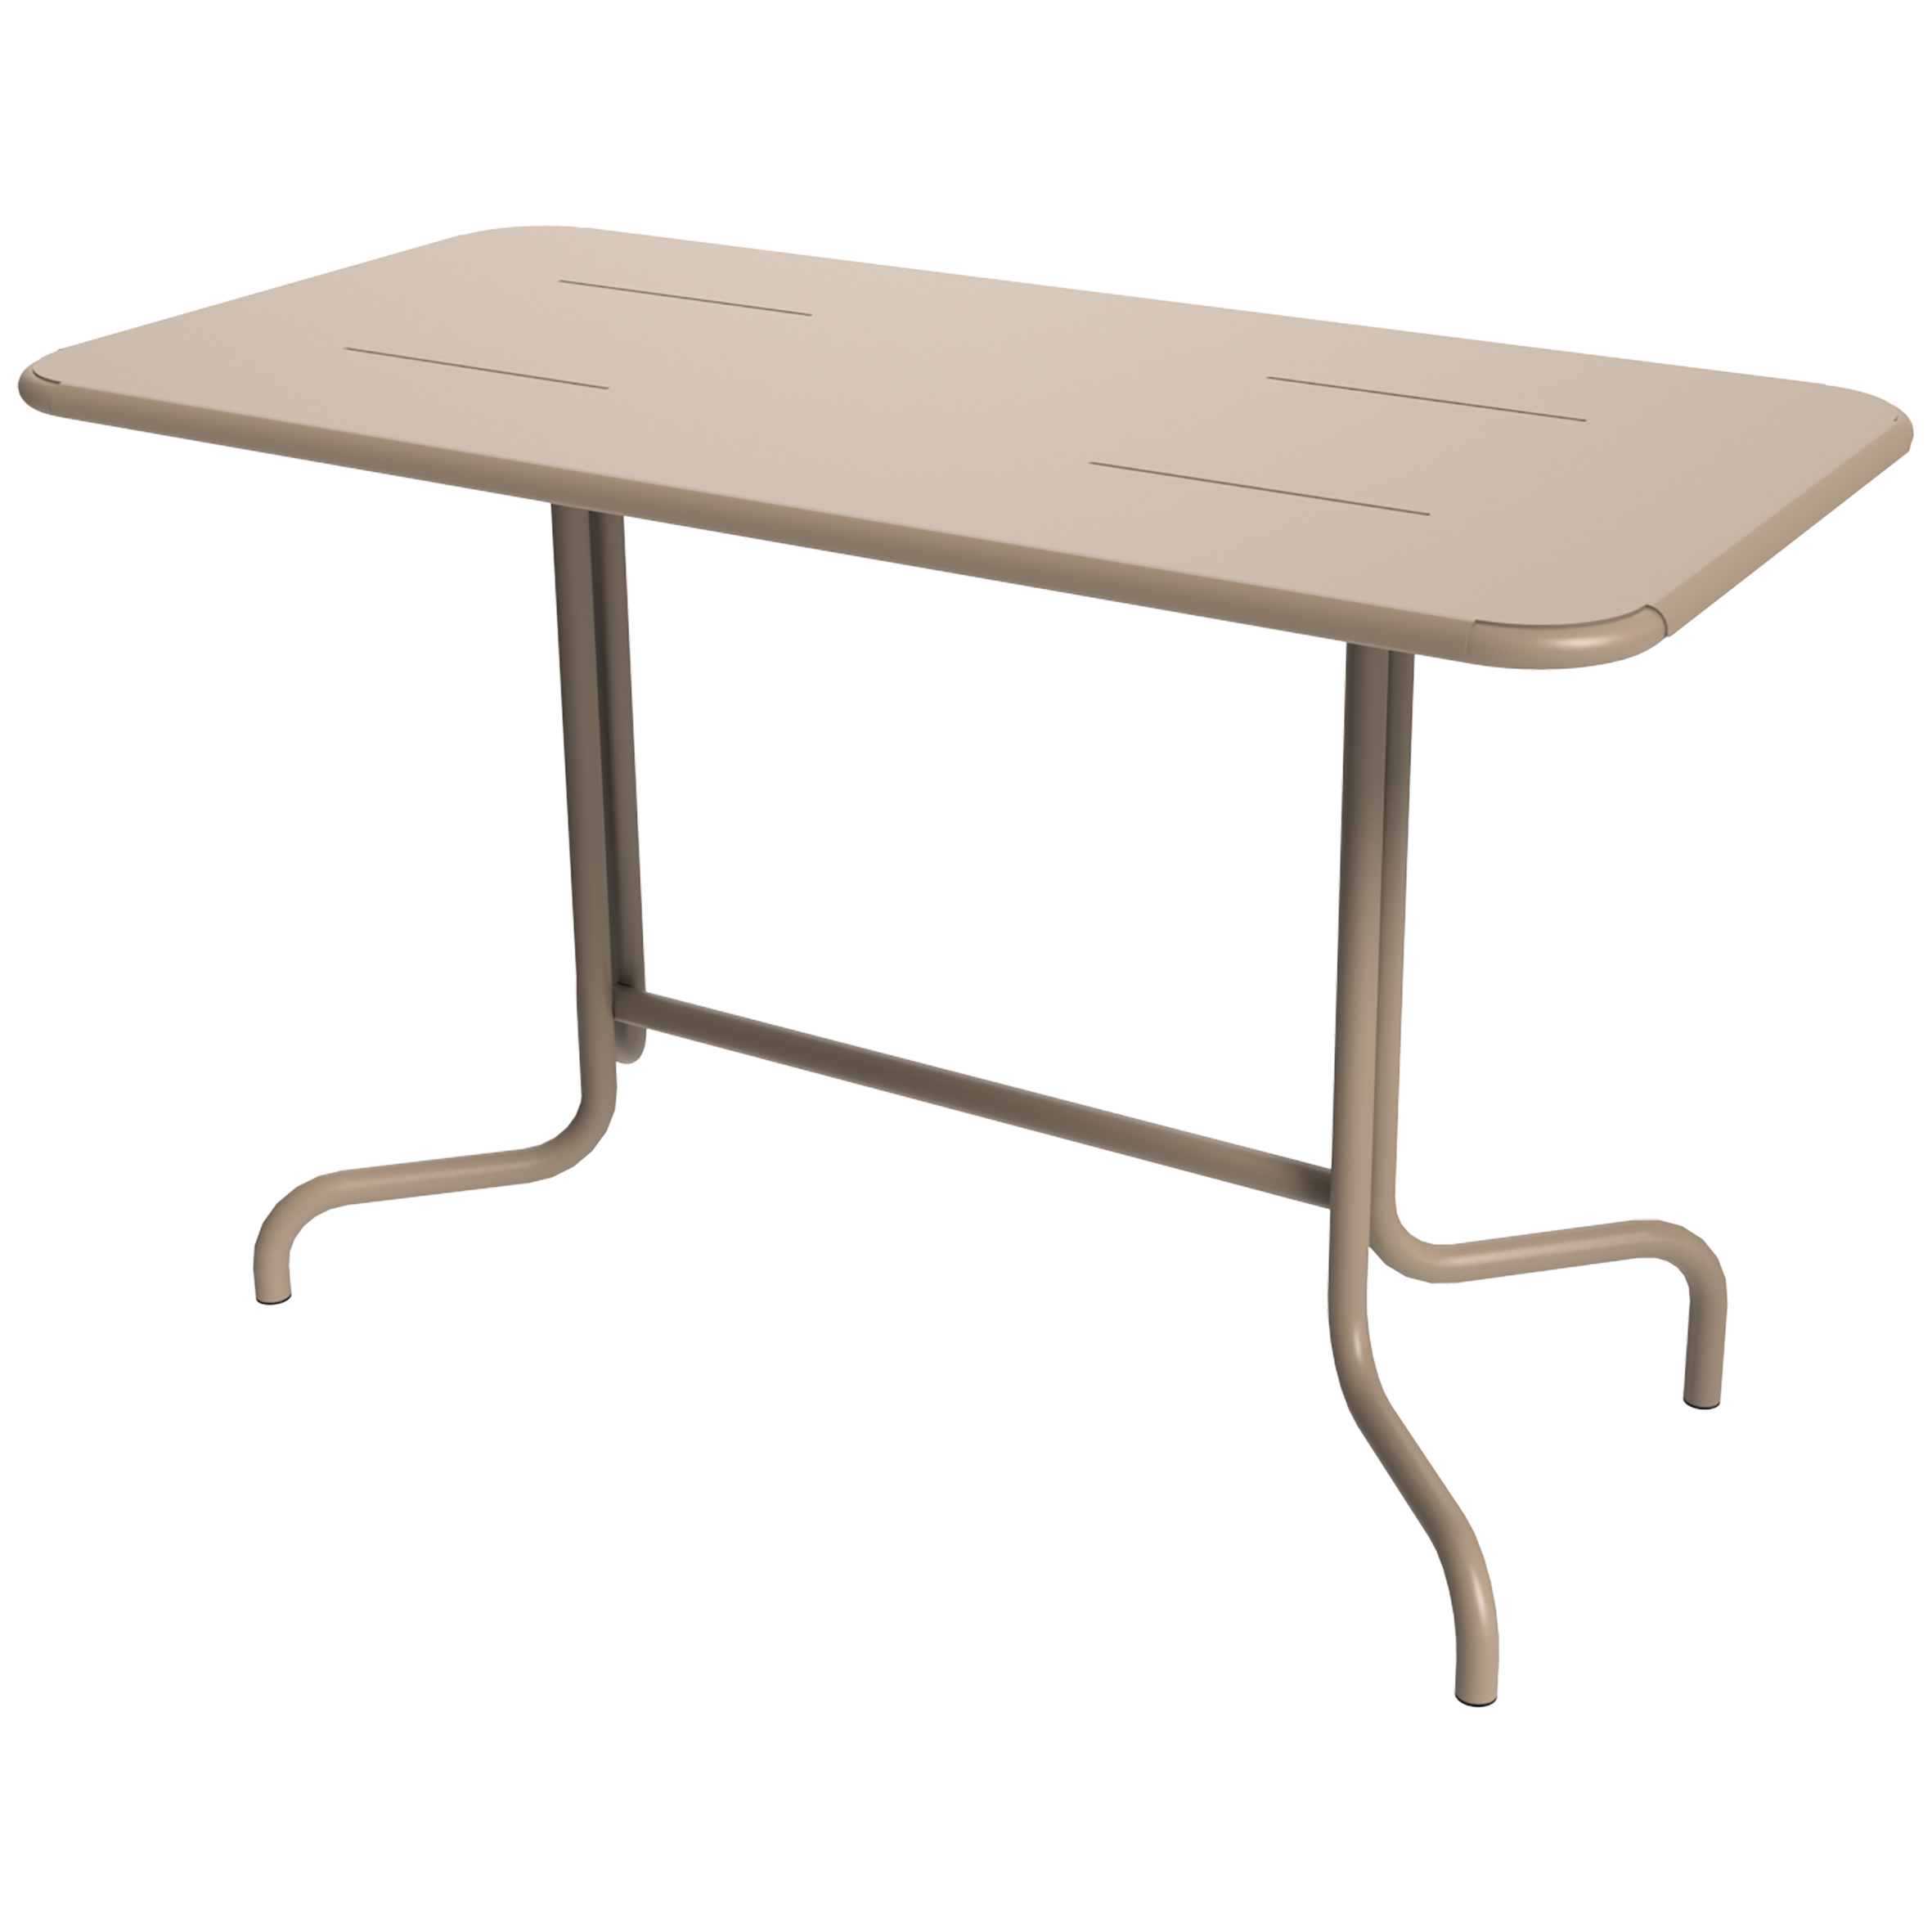 Table pieds centraux 1300 x 650 mm plateau rabattable EOLIA